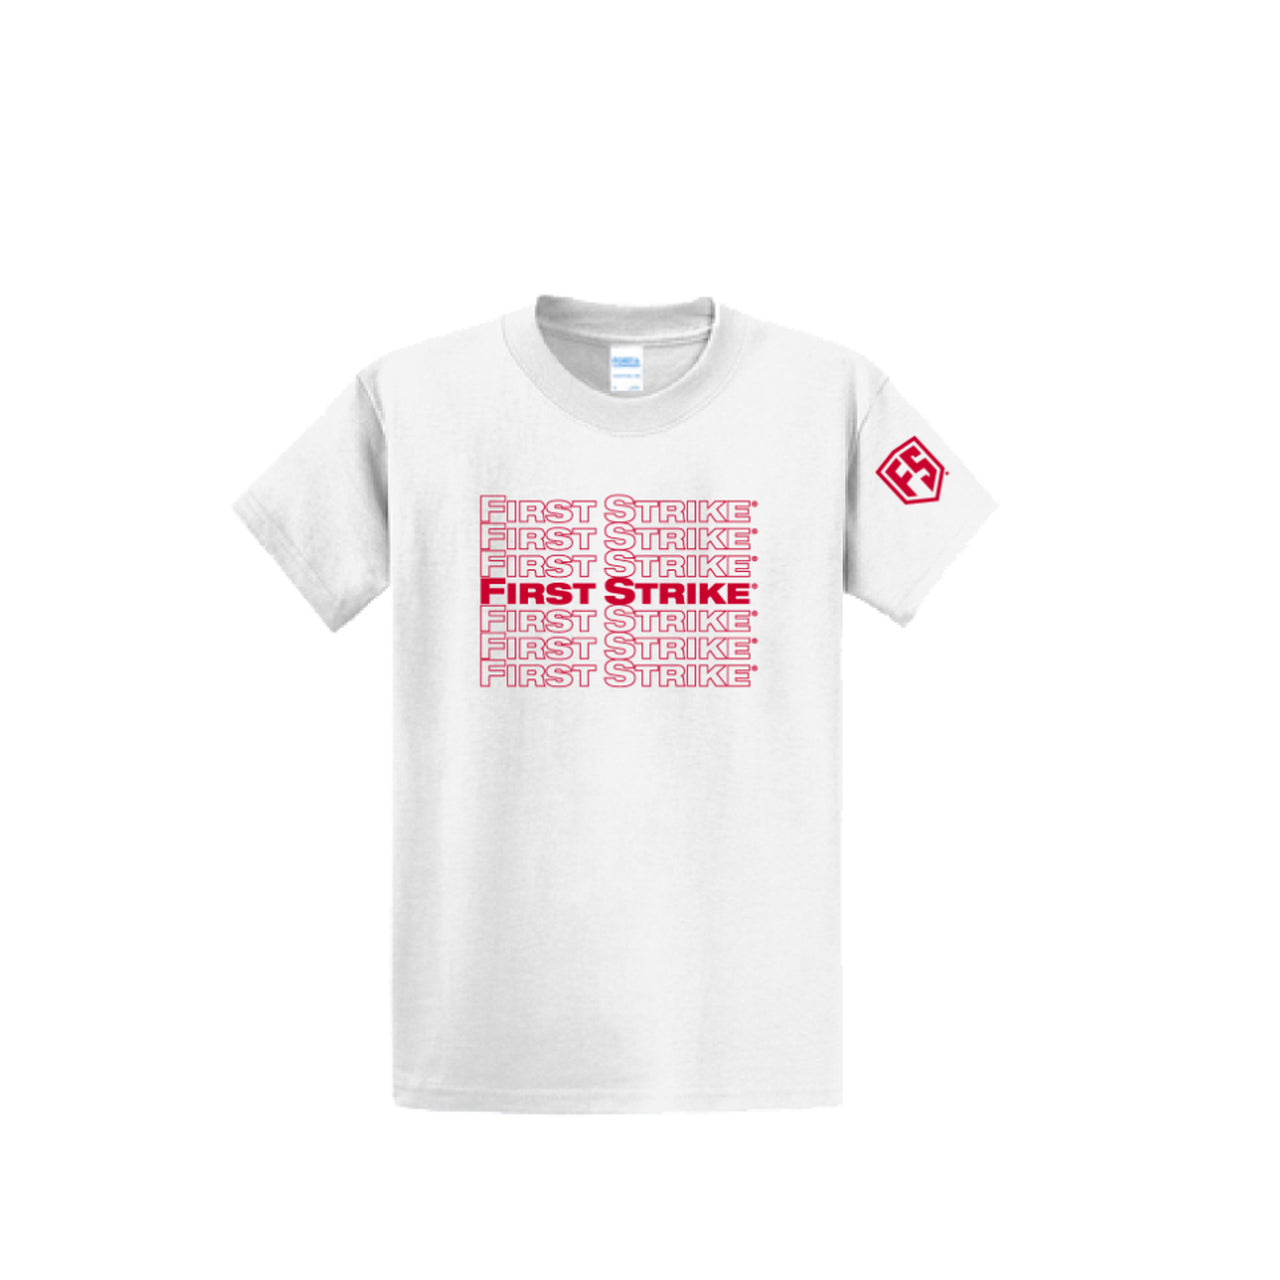 First Strike T-Shirt - White with Red